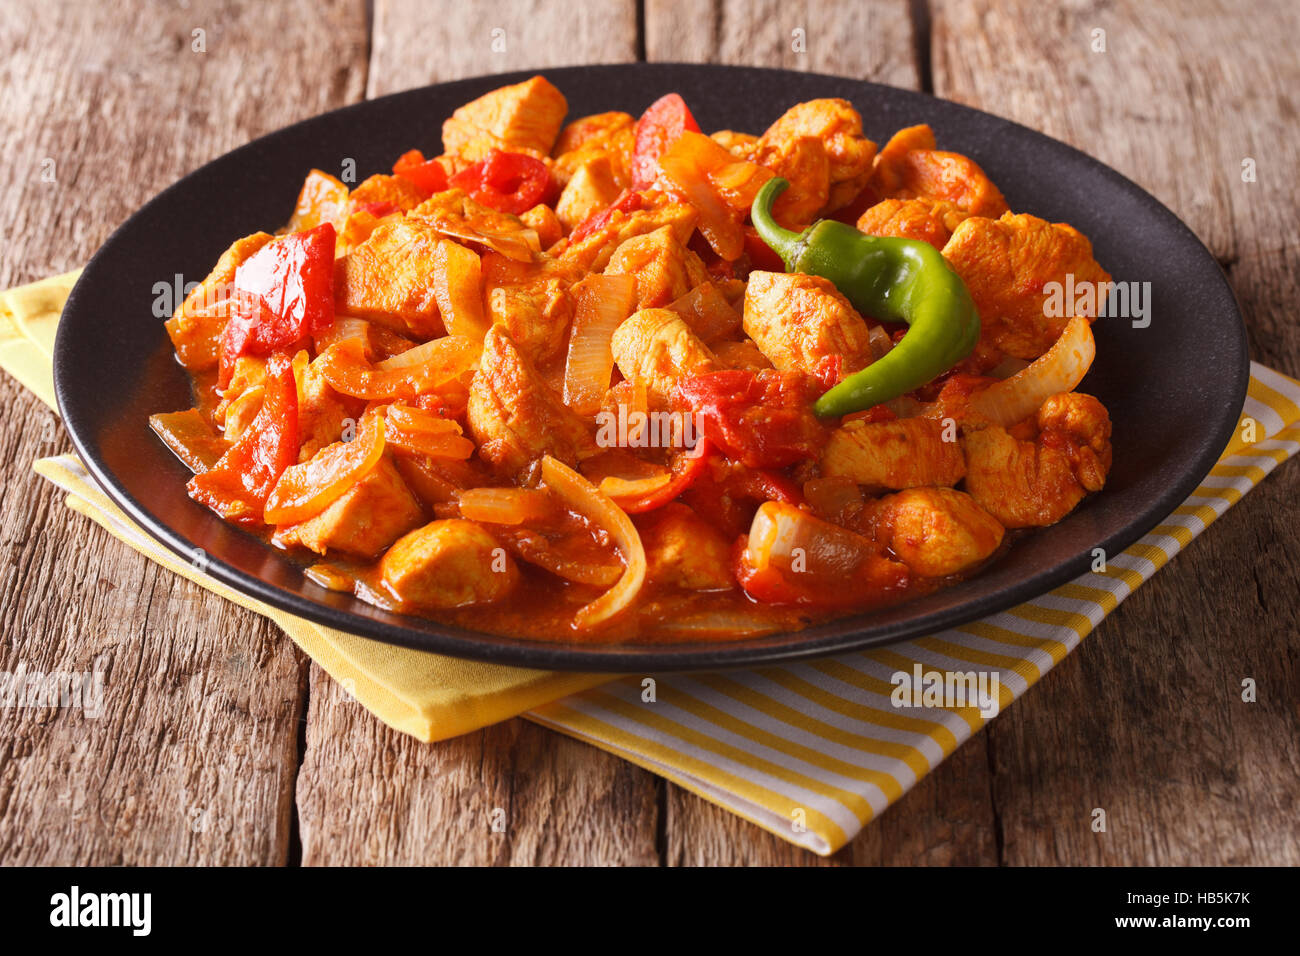 Indian Cuisine: Spicy chicken jalfrezi with pepper and onion close-up on a plate. horizontal Stock Photo